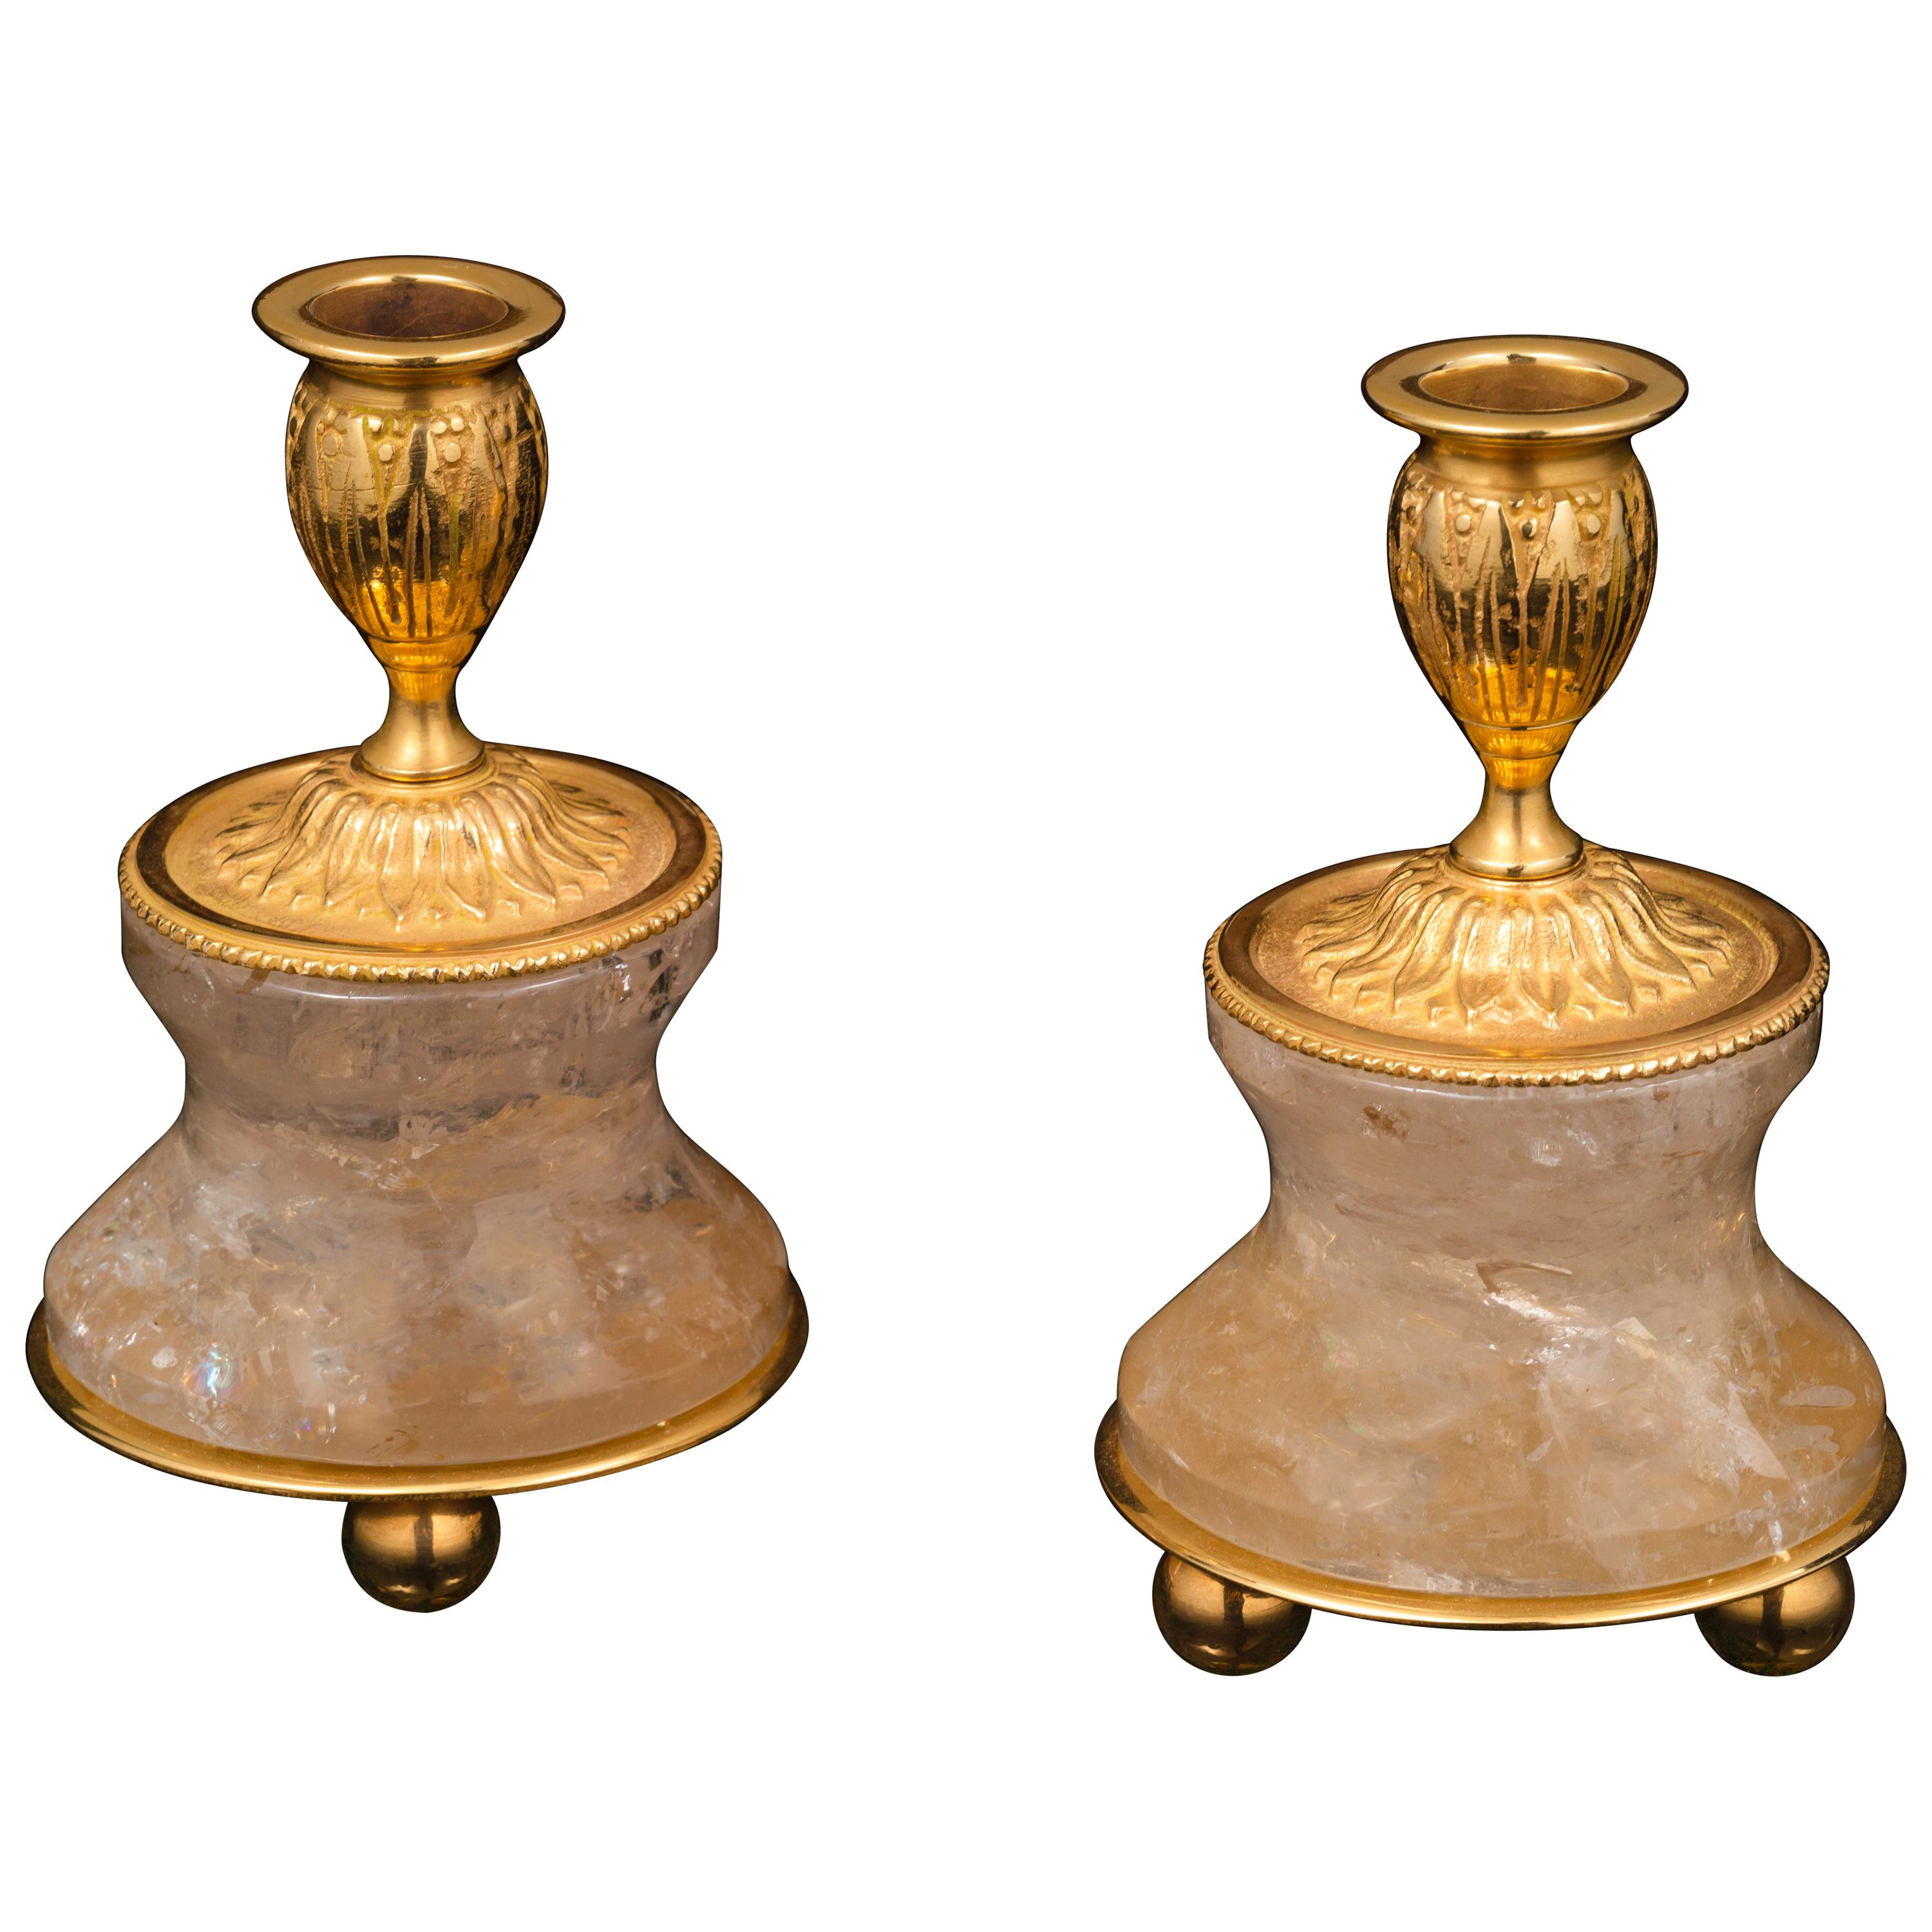 Pair of Rock Crystal and Gilt-Bronze Lamps/Candlesticks Louis the XVI th Style